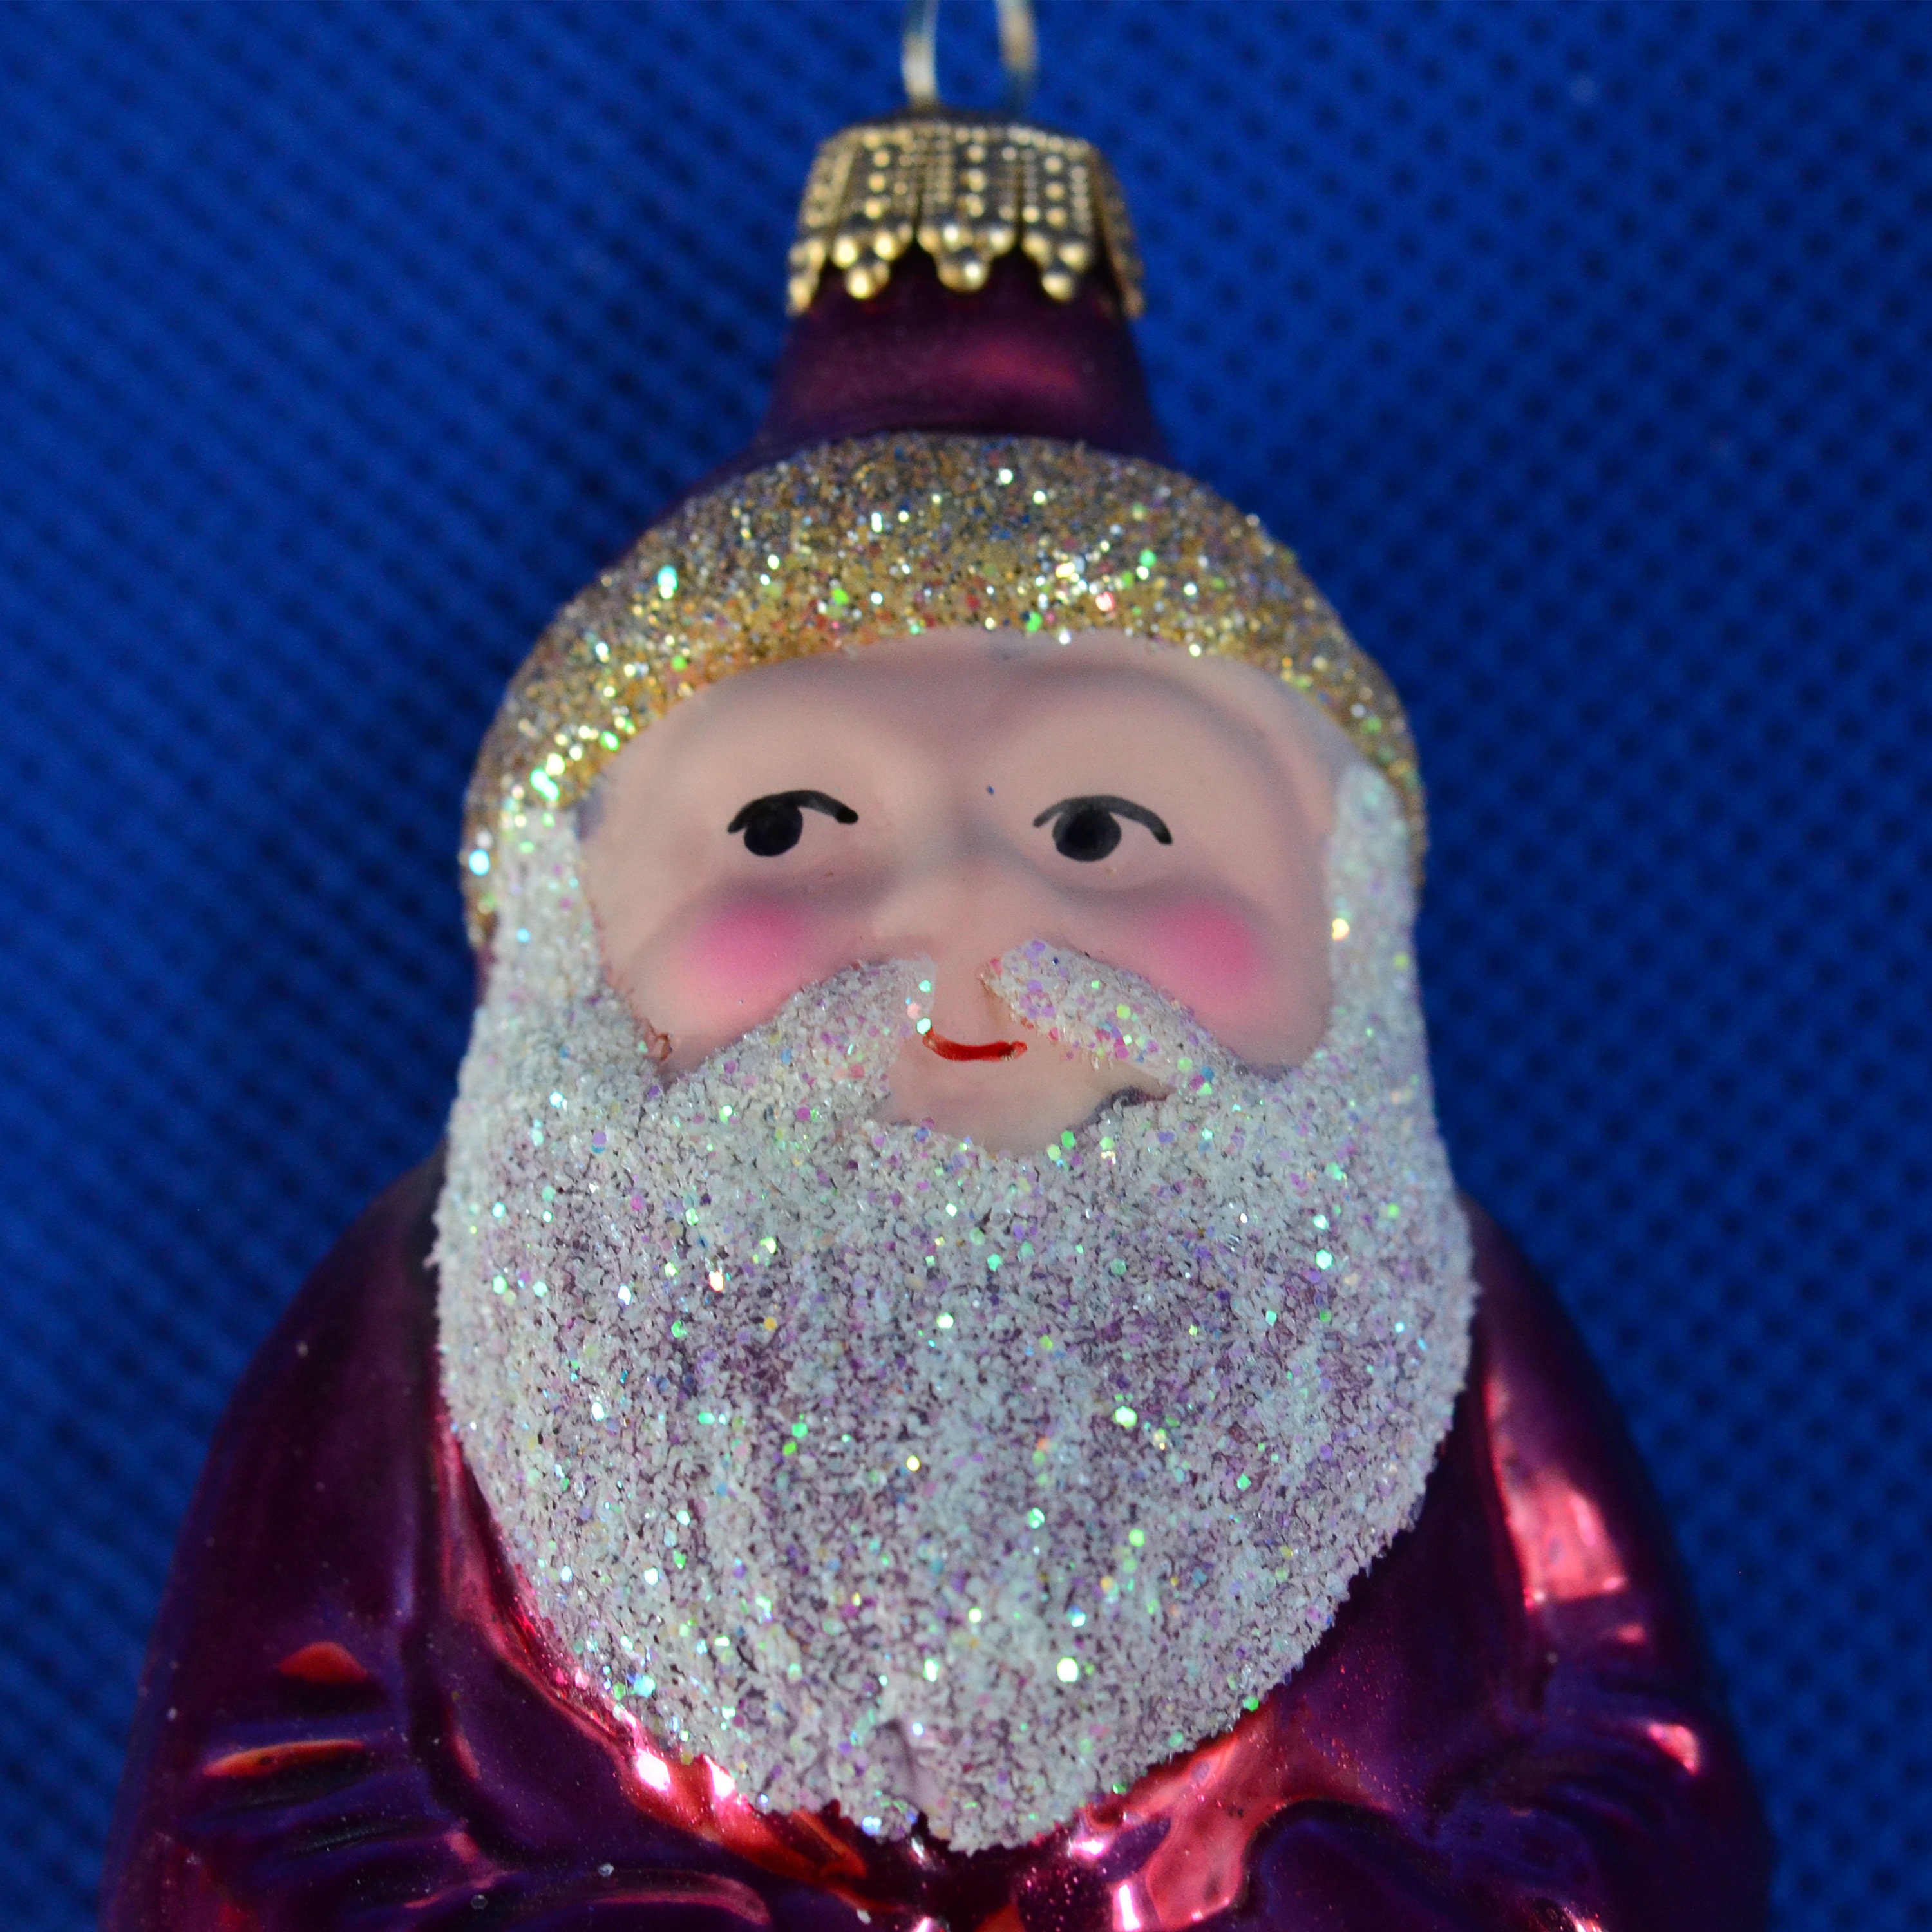 Krebs Lauscha Blown Glass Santa Ornament Hand Decorated Sparkle Glitter  Holiday Christmas Décor Made in West Germany Original Box - Etsy